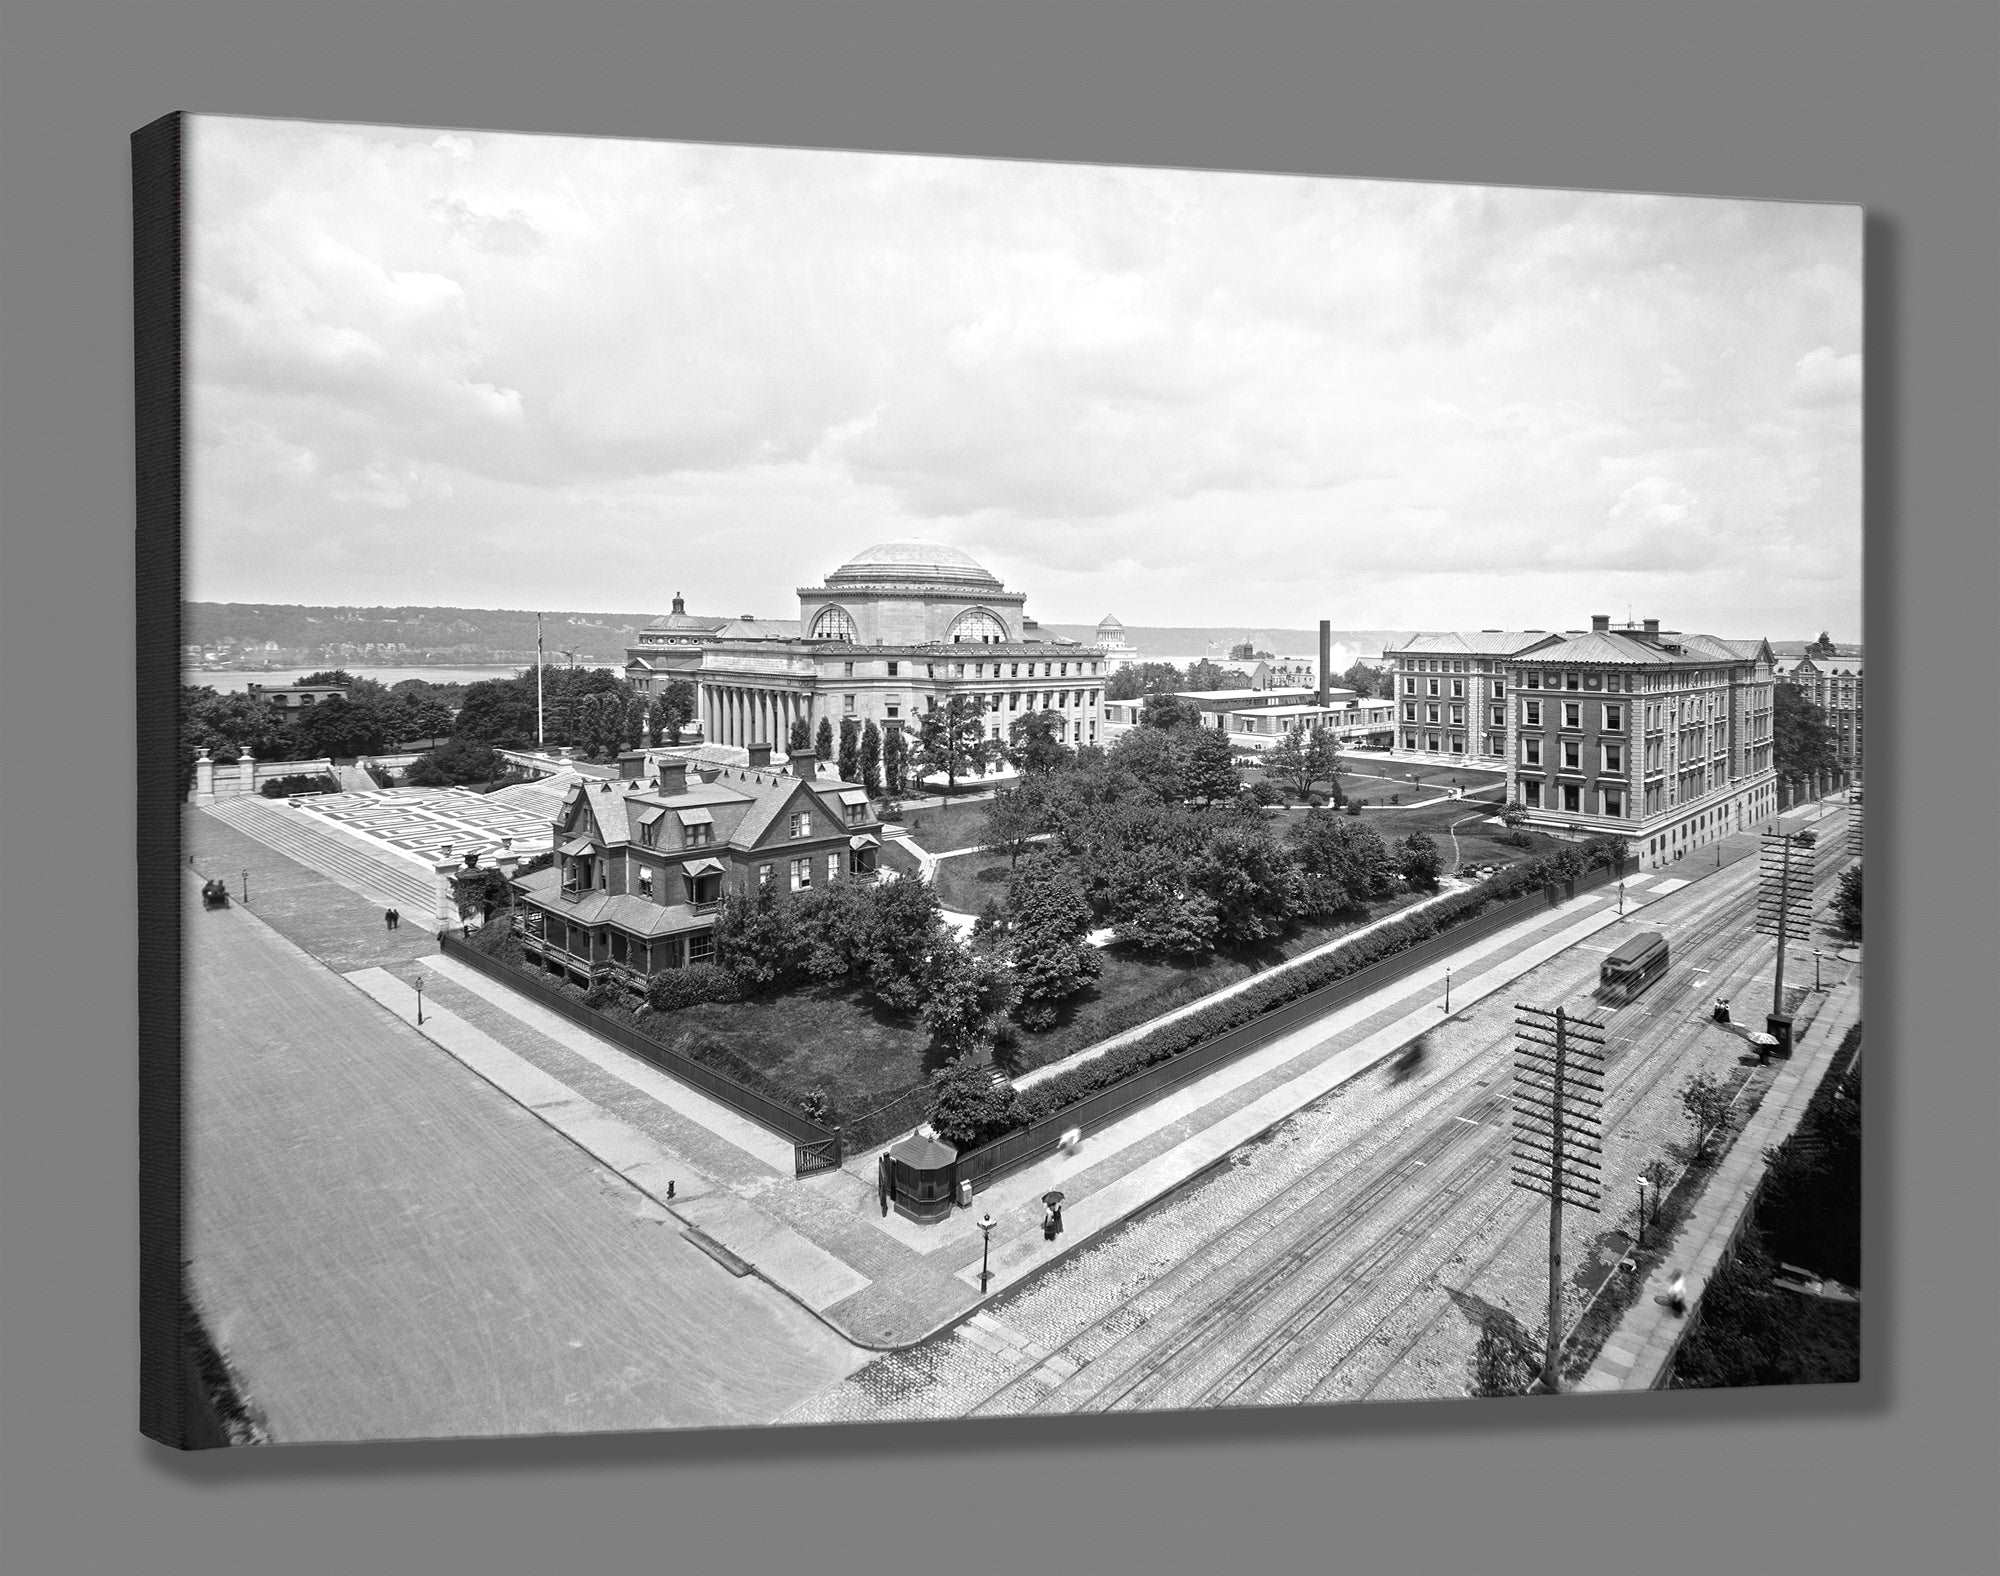 A canvas reproduction print of a vintage photograph of Columbia University with the Hudson River in the background